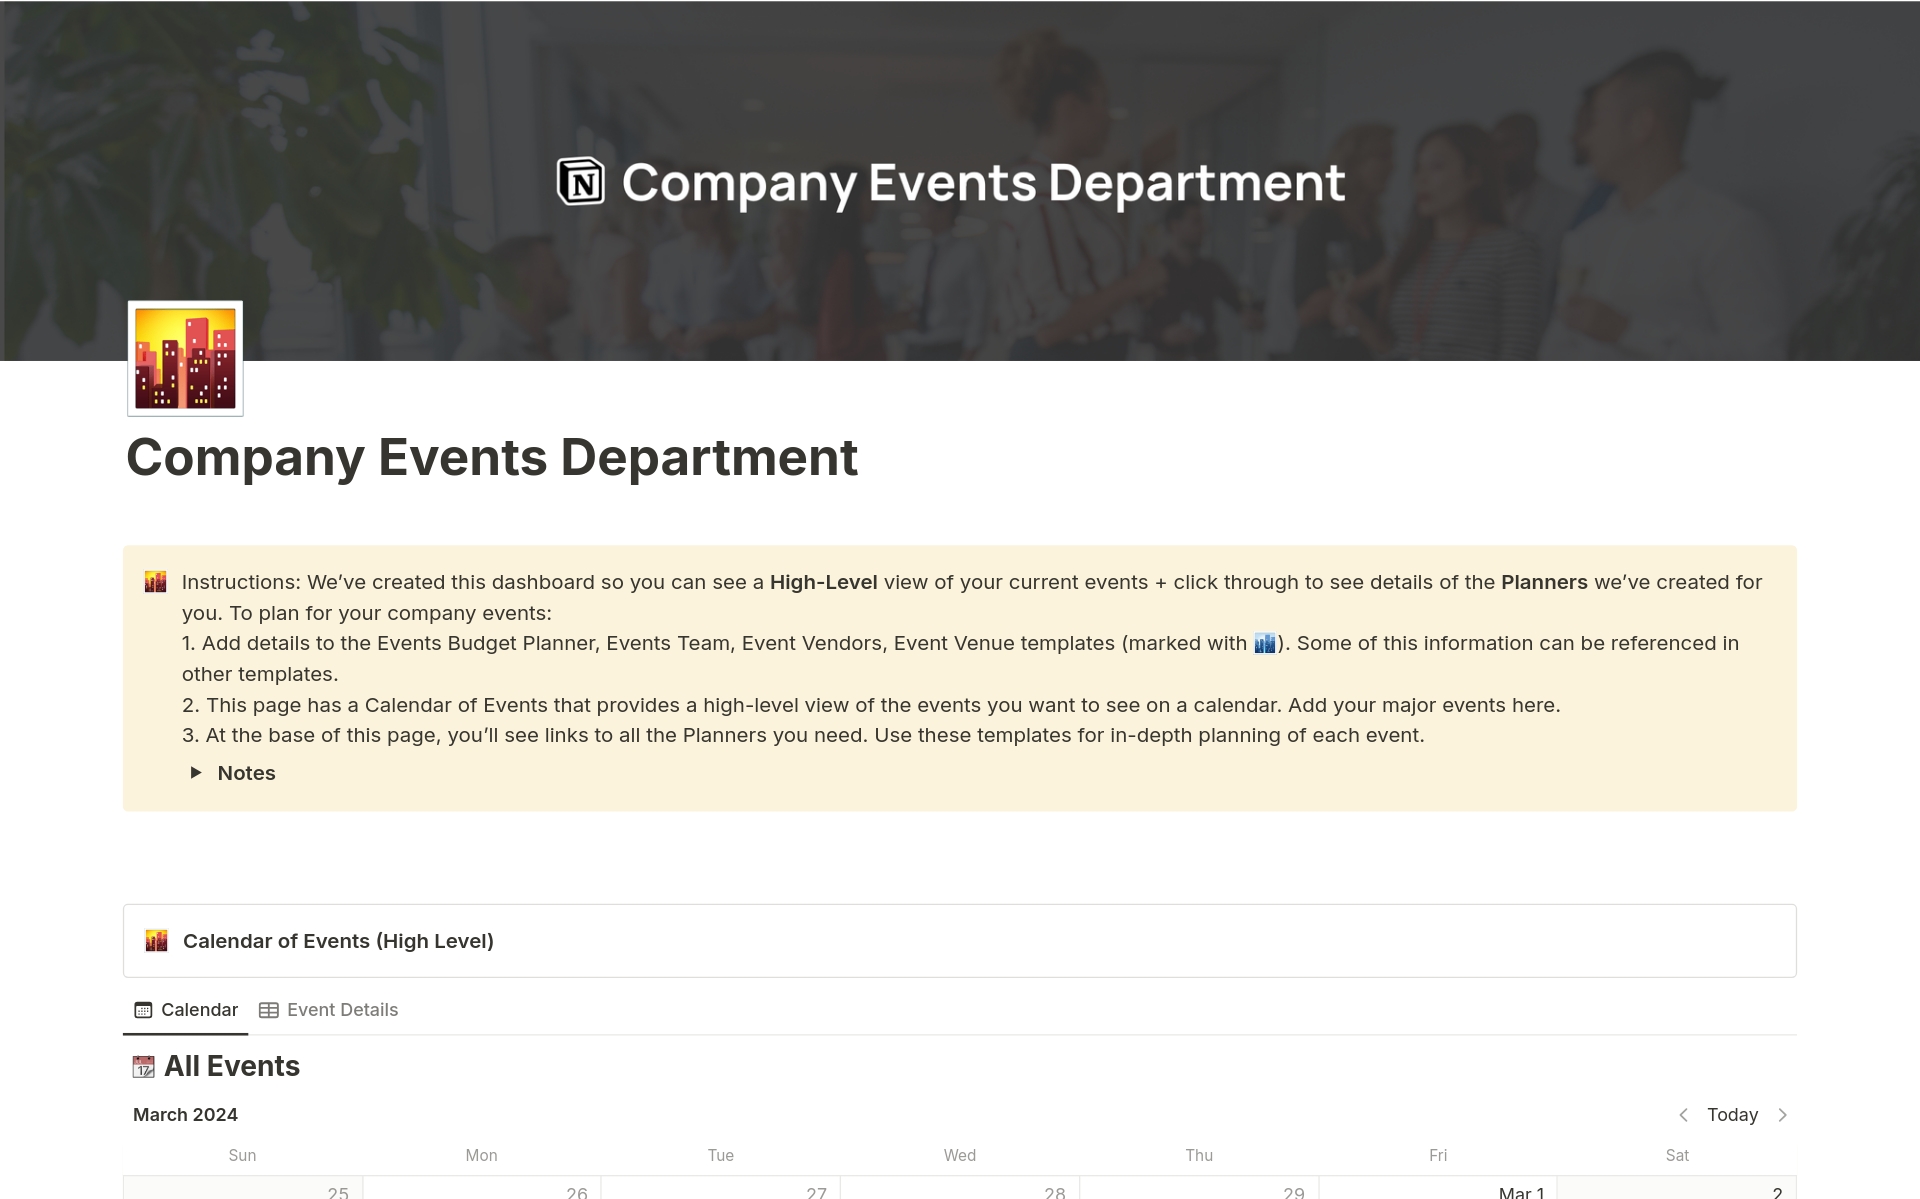 Use this comprehensive set of templates to plan & run your next event, meeting, workshop, trade show, company retreat, company trip etc.